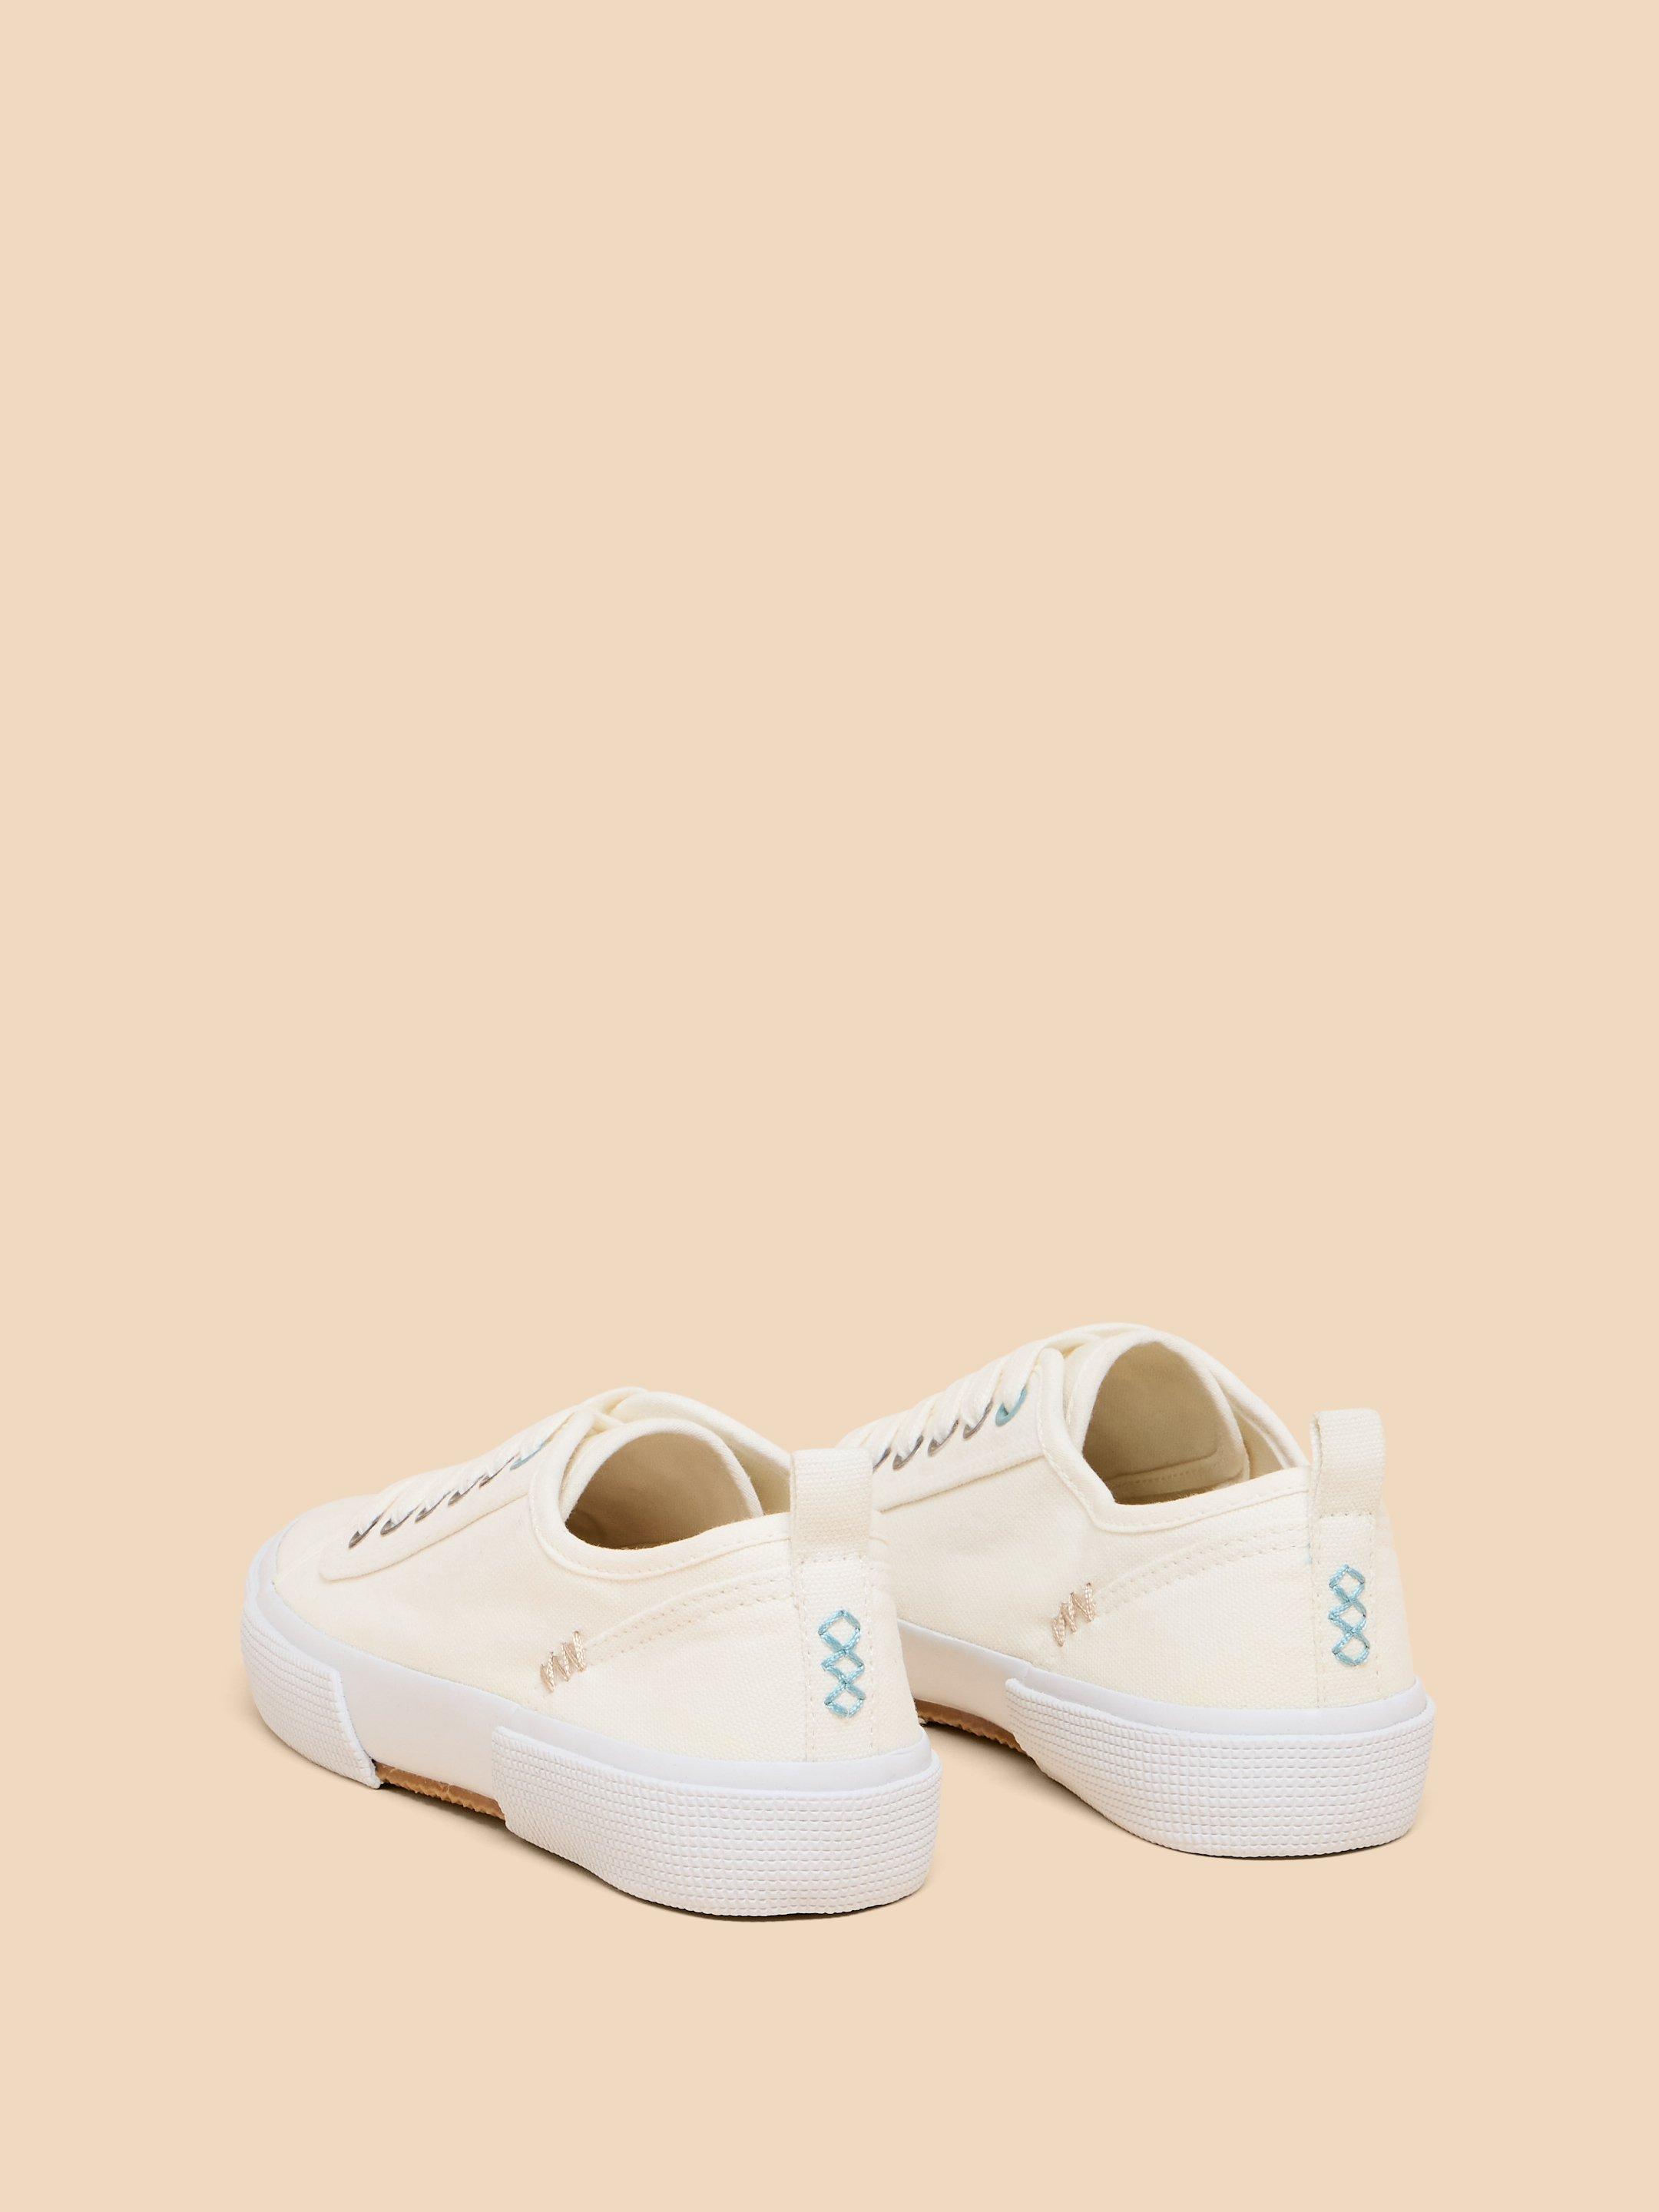 Pippa Canvas Lace Up Trainer in BRIL WHITE - FLAT DETAIL